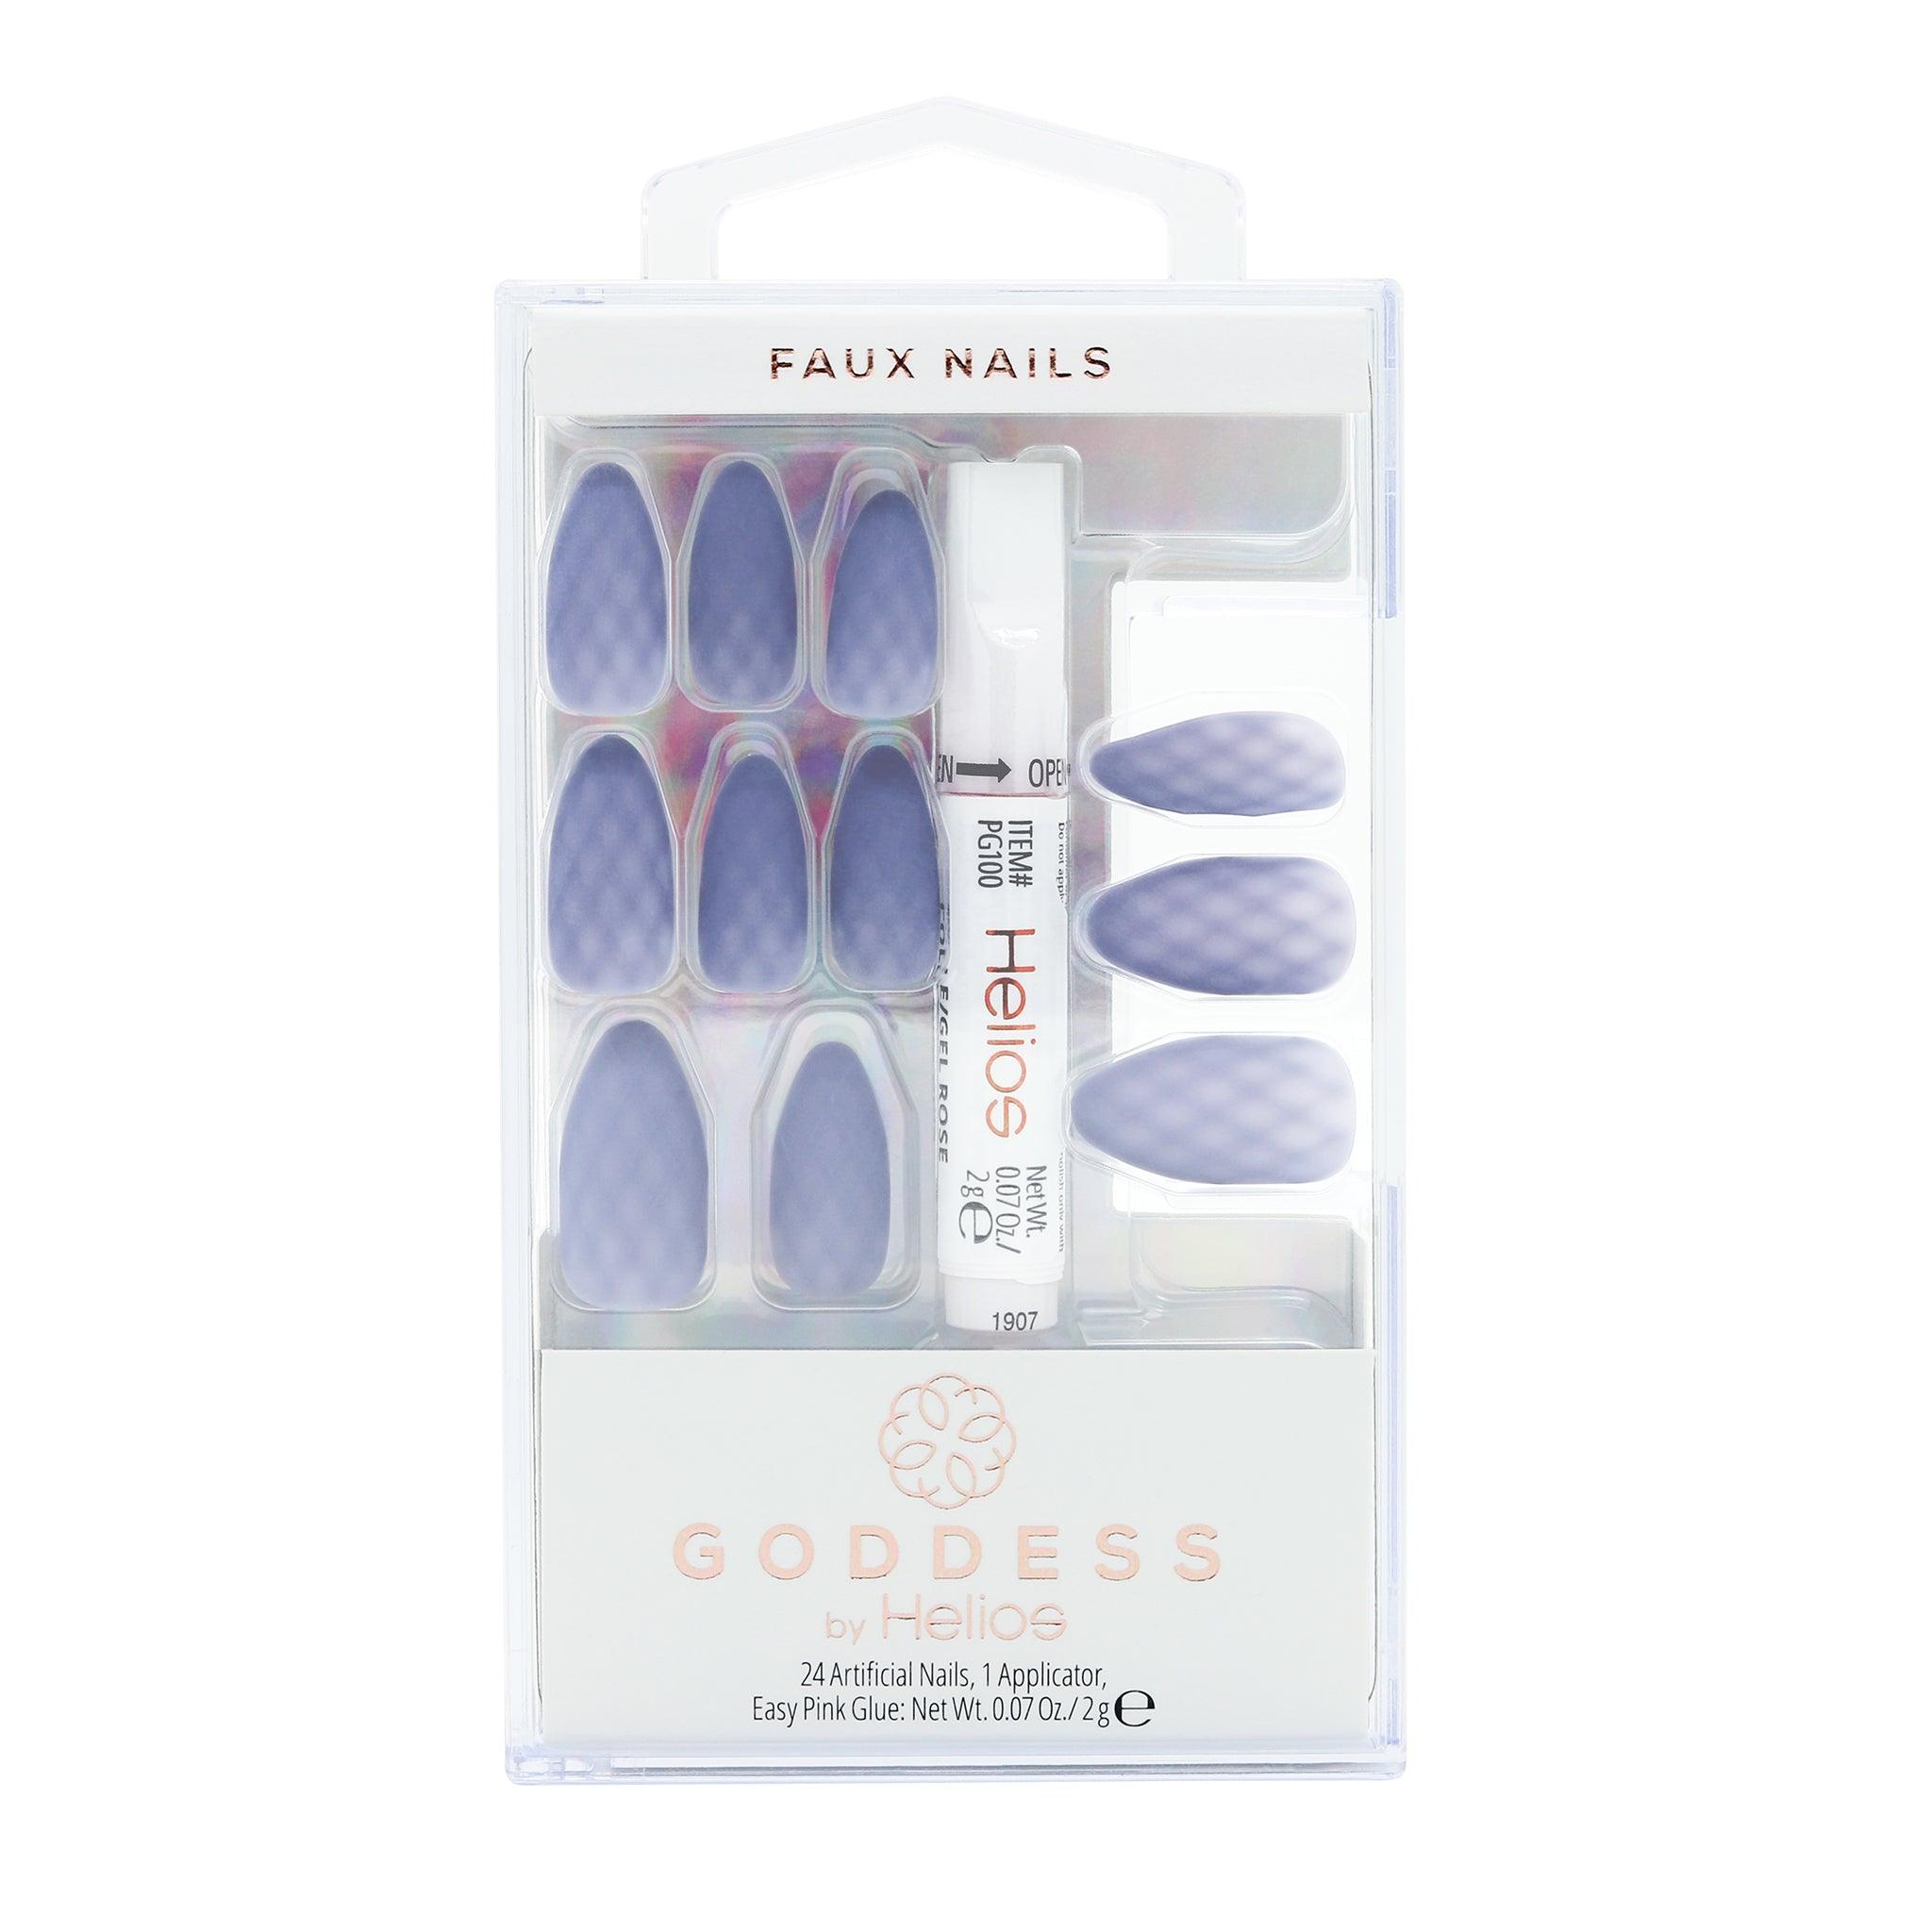 GODDESS ARTIFICIAL NAILS - HGOD0026 - Helios Nail Systems